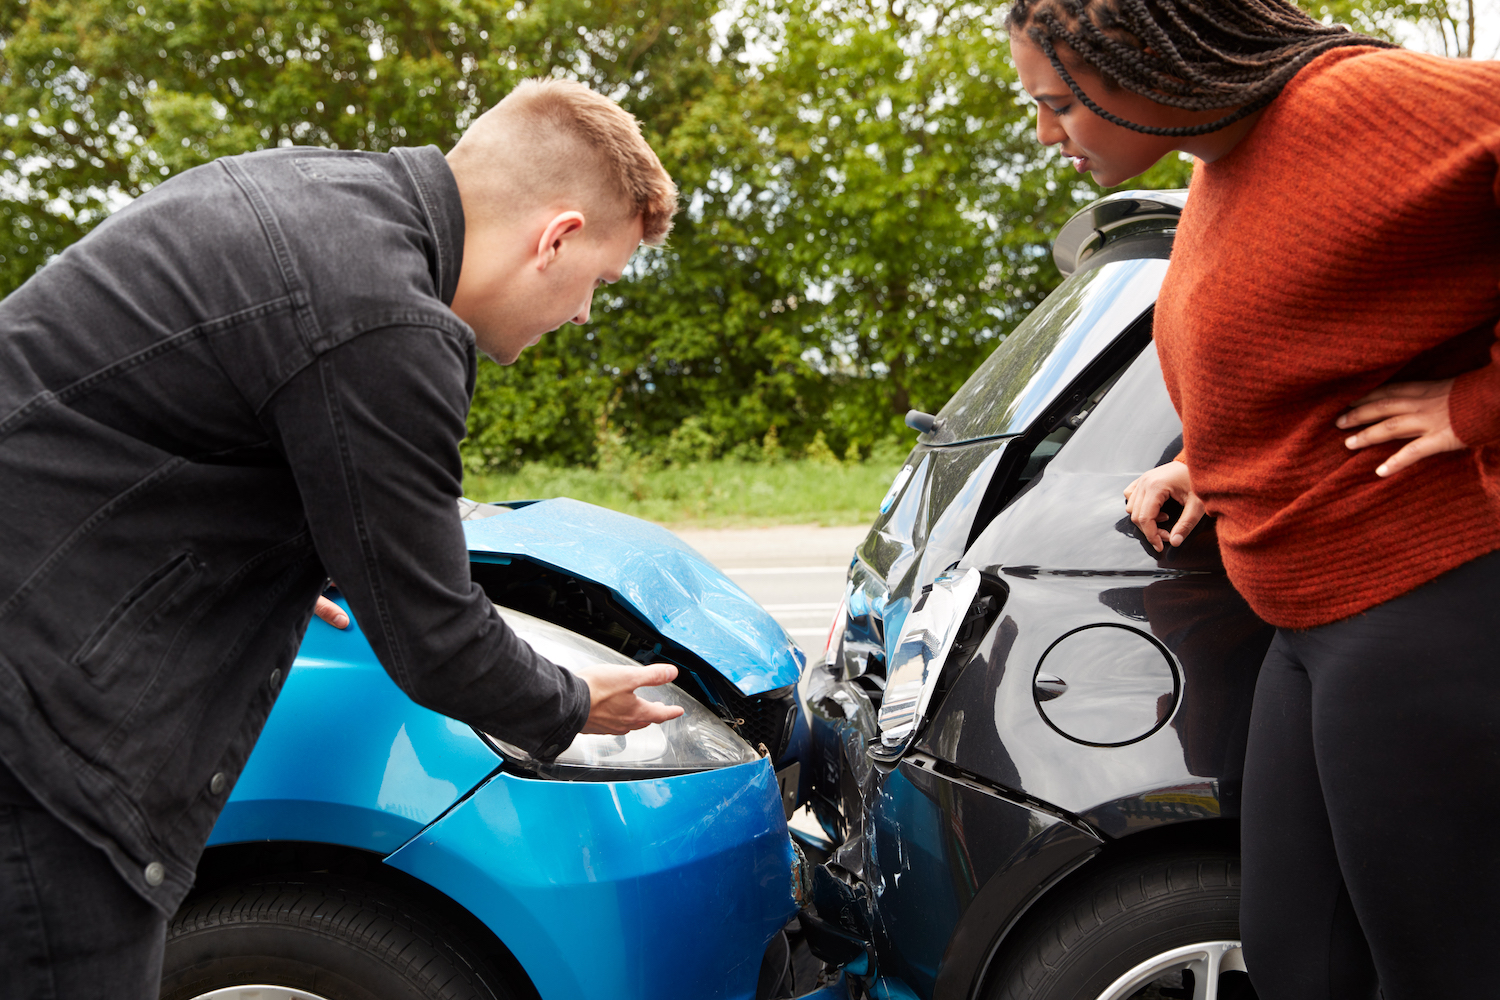 5 Tips To Help Cover Your Legal Troubles After Getting In A Car Accident